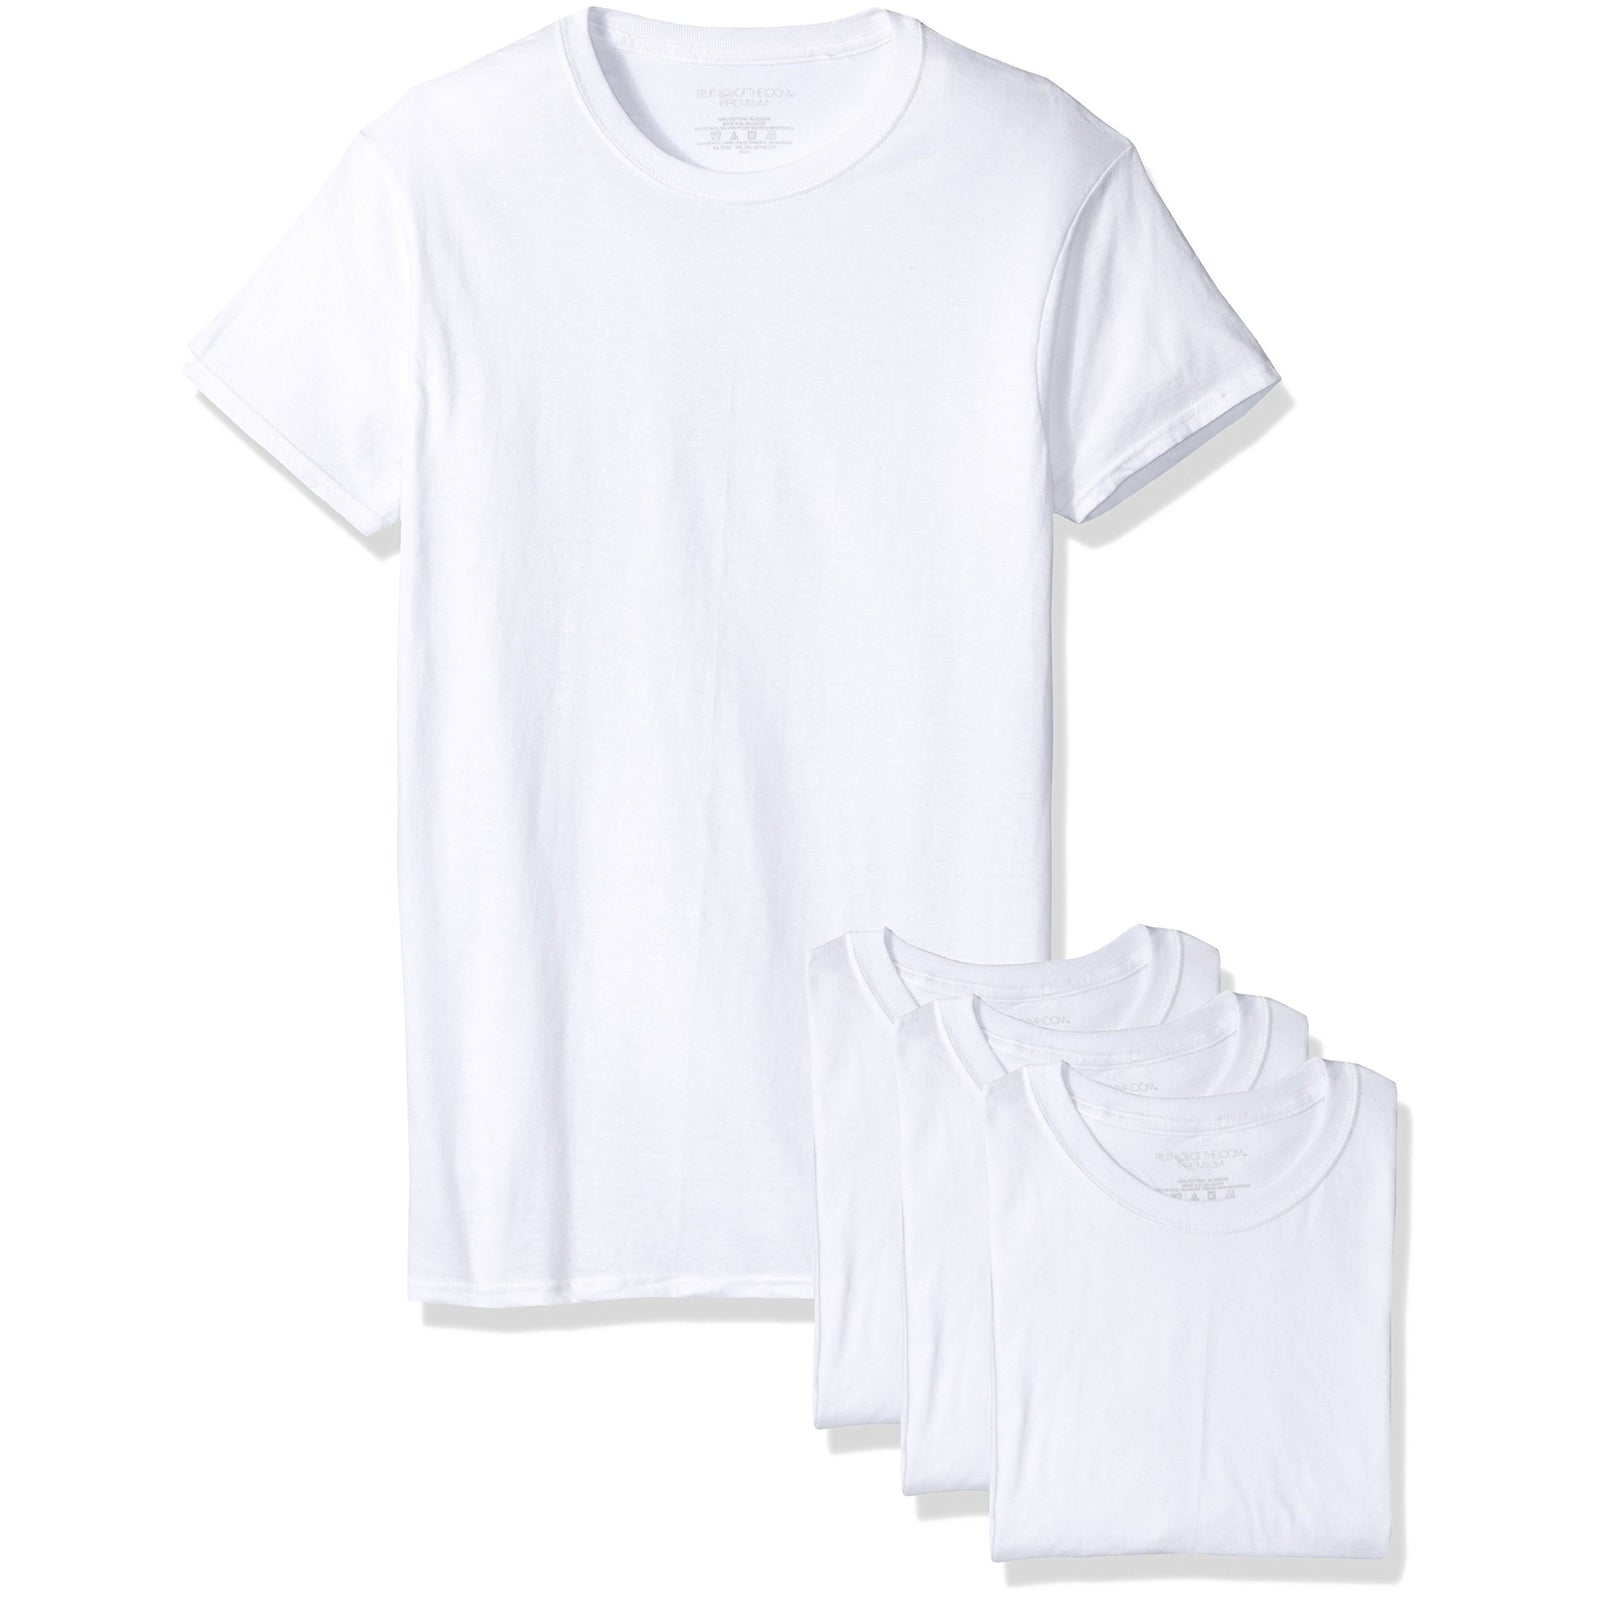 4-Pack: Fruit Of The Loom Mens T Shirt 100% Cotton White